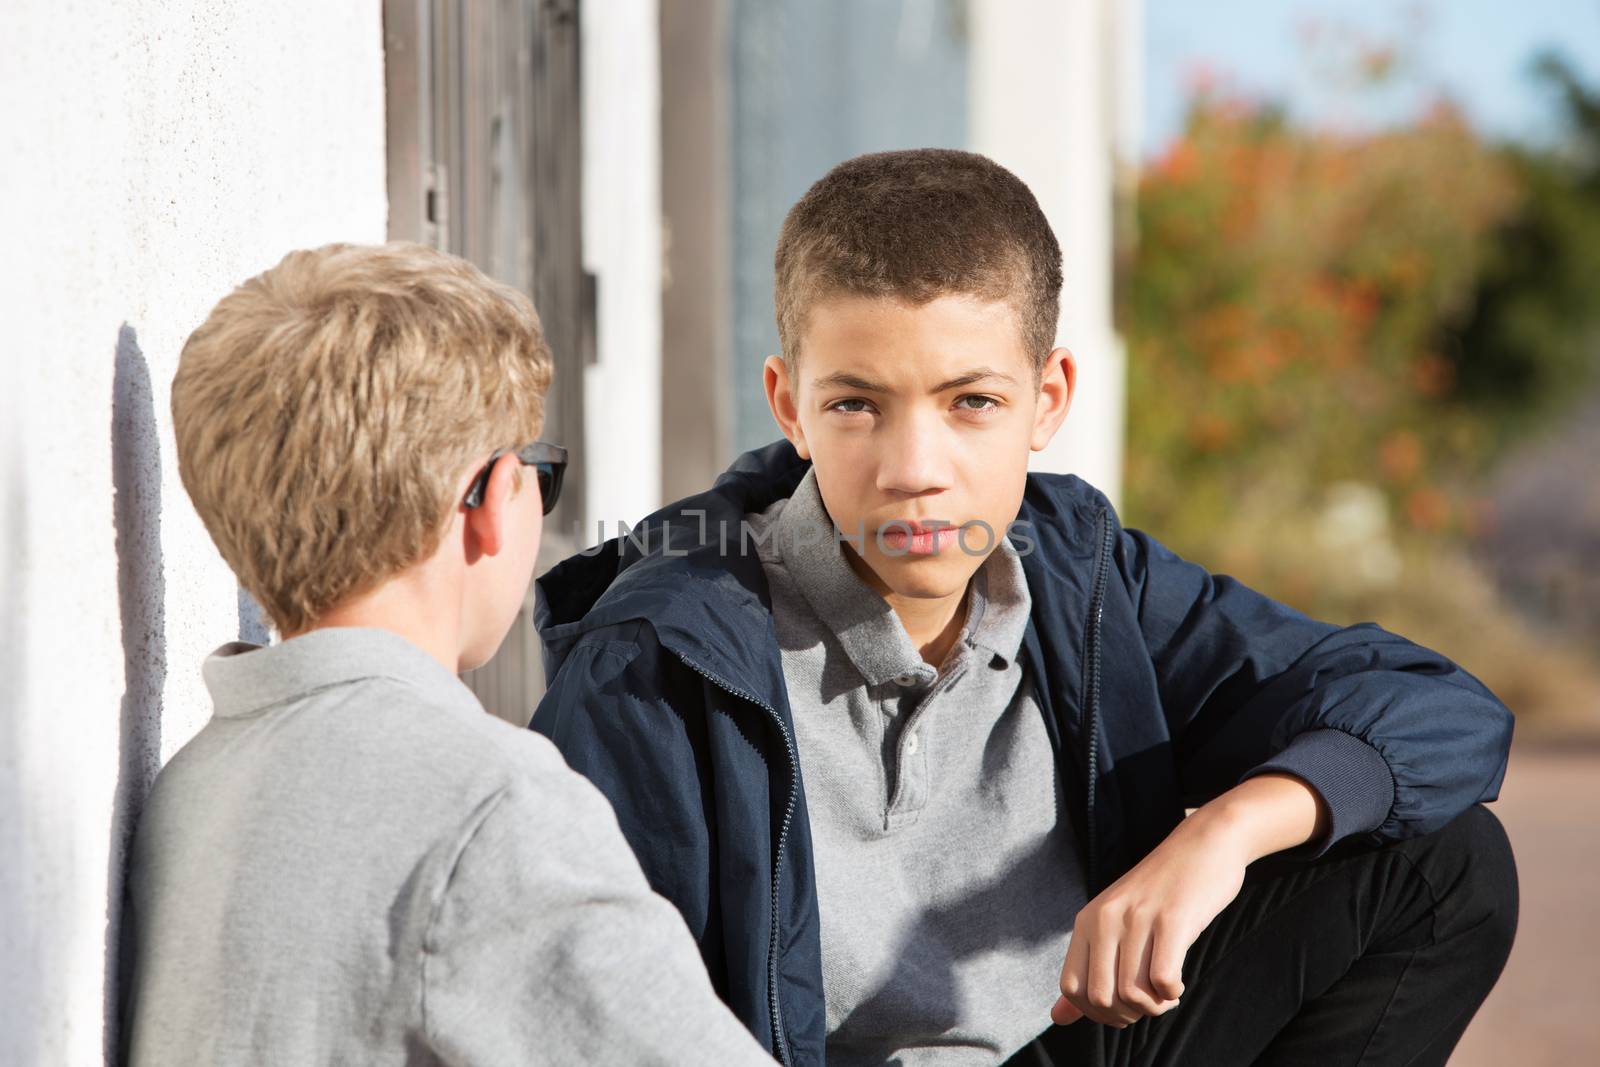 Male teen with serious expression listening to friend with blond hair talking outside